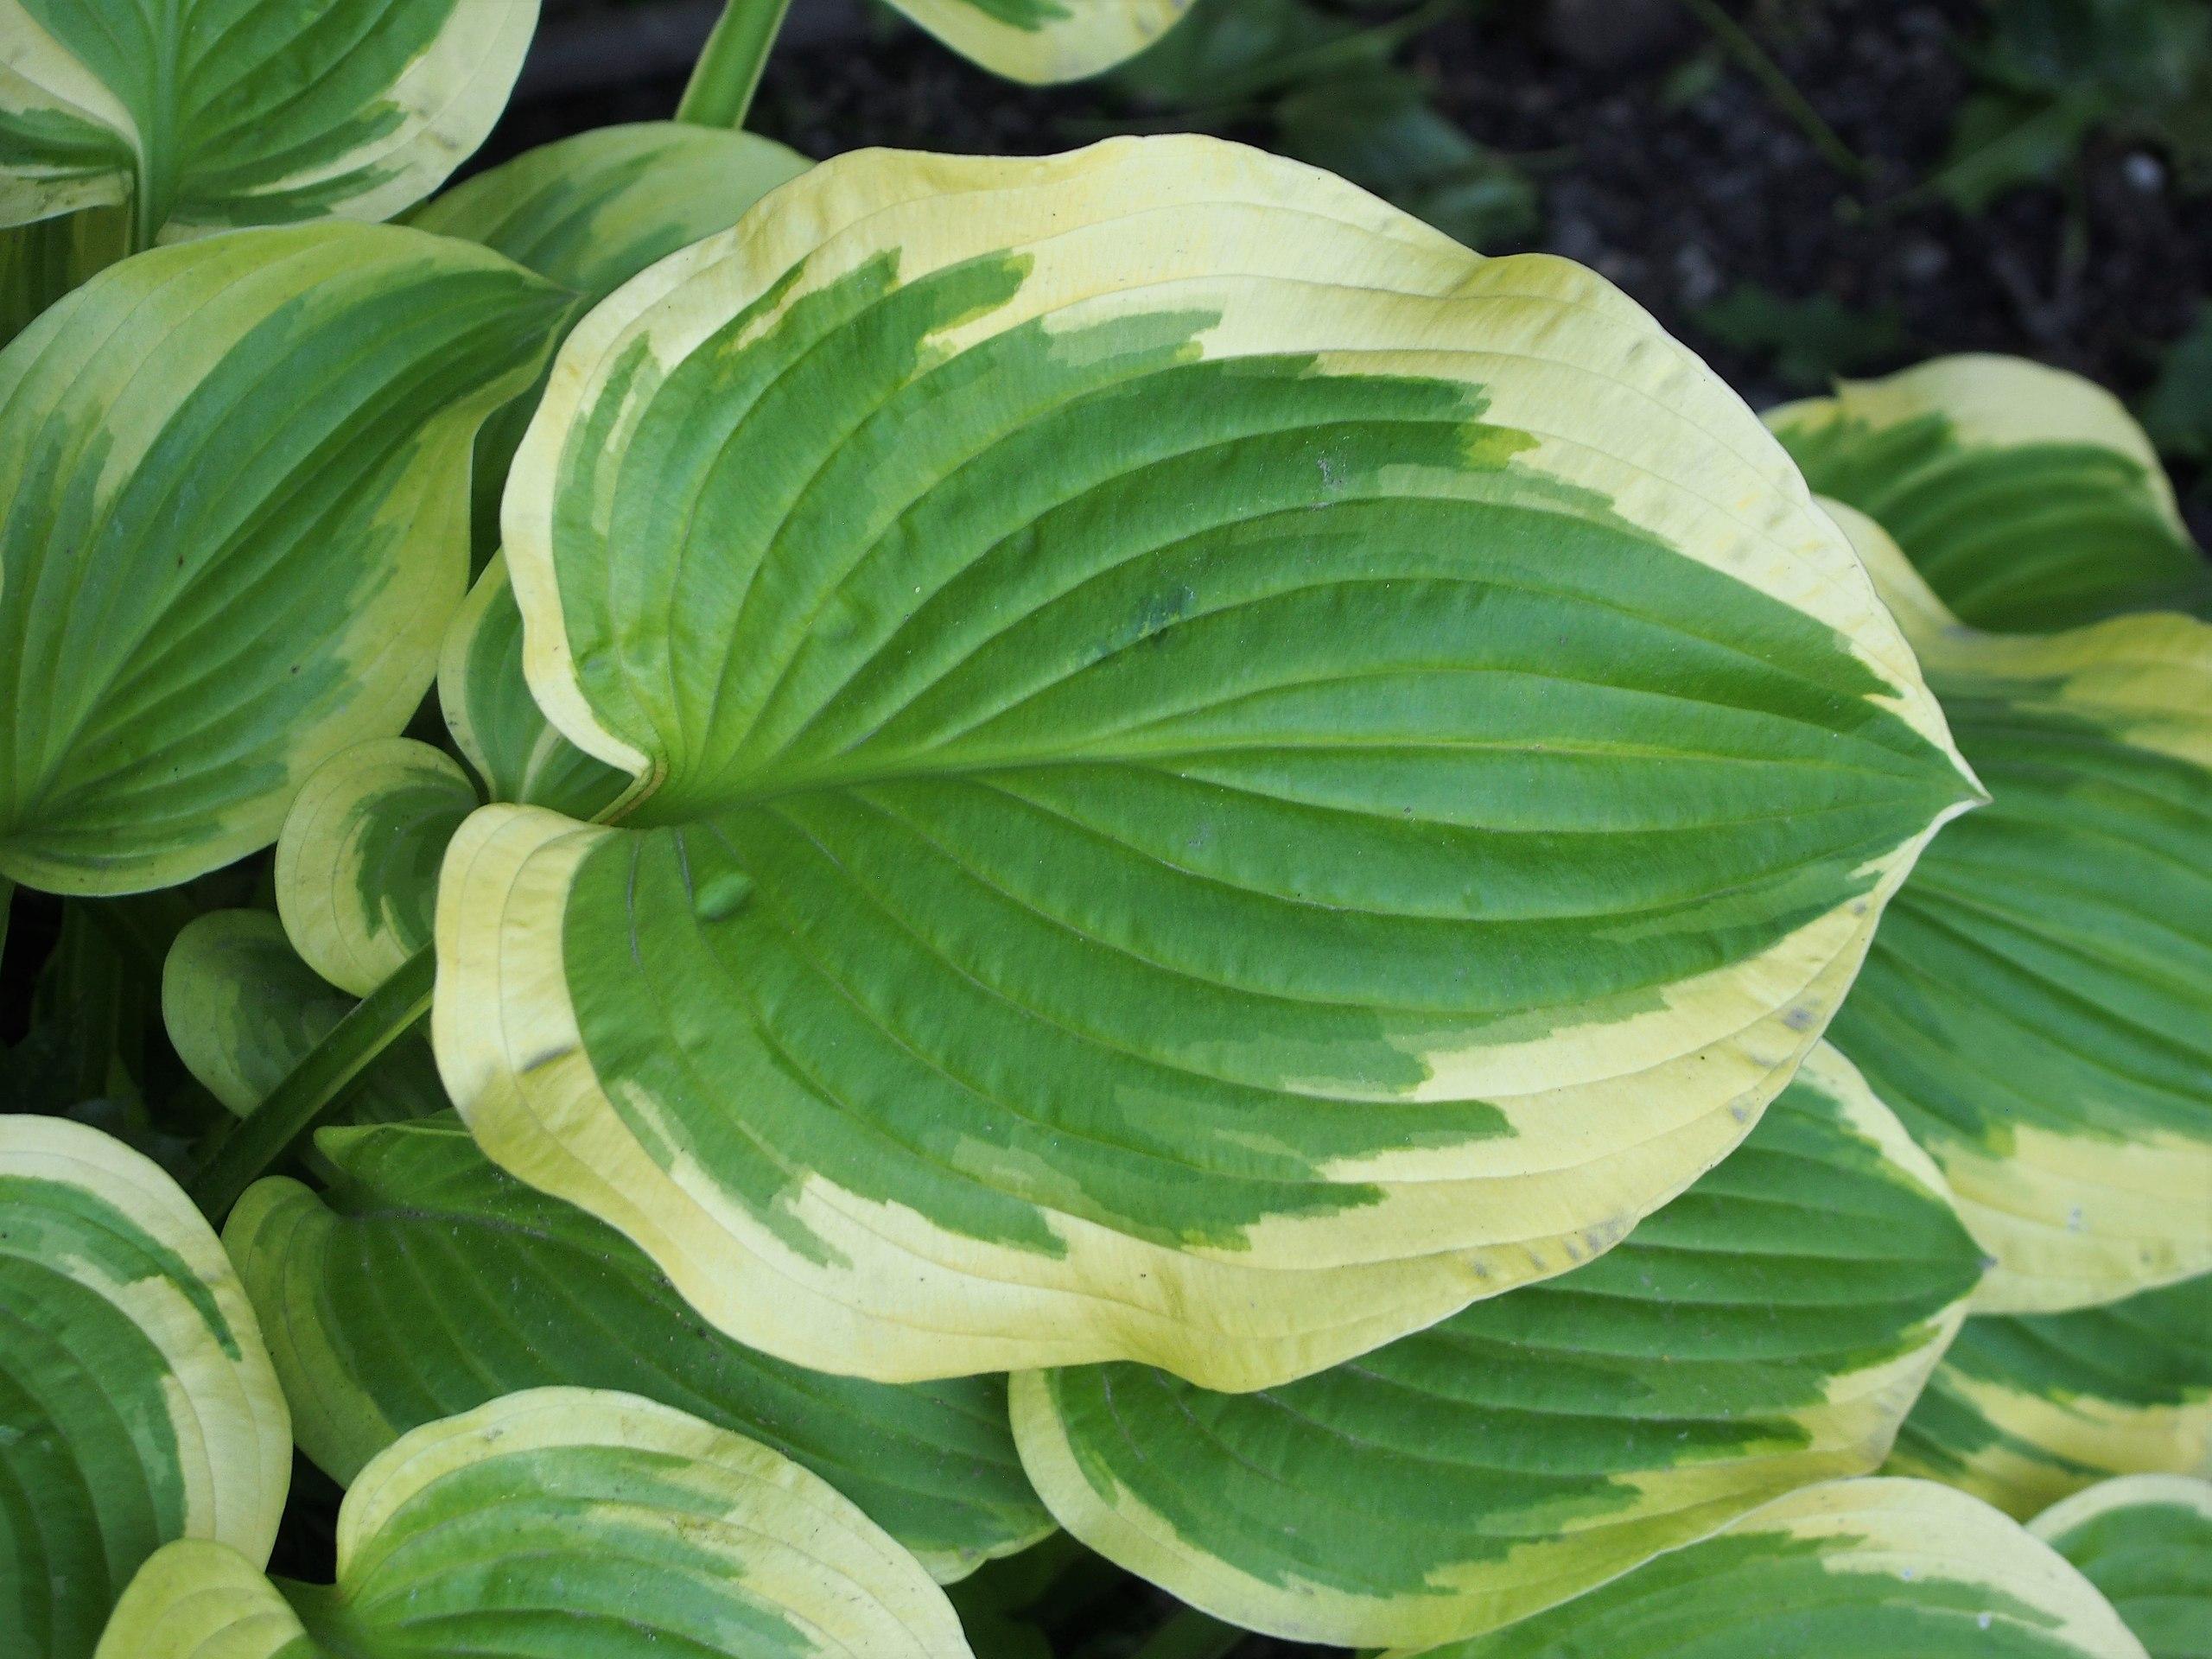 Yellow-green leaves with yellow midrib, yellow blades, and yellow-green petiole.